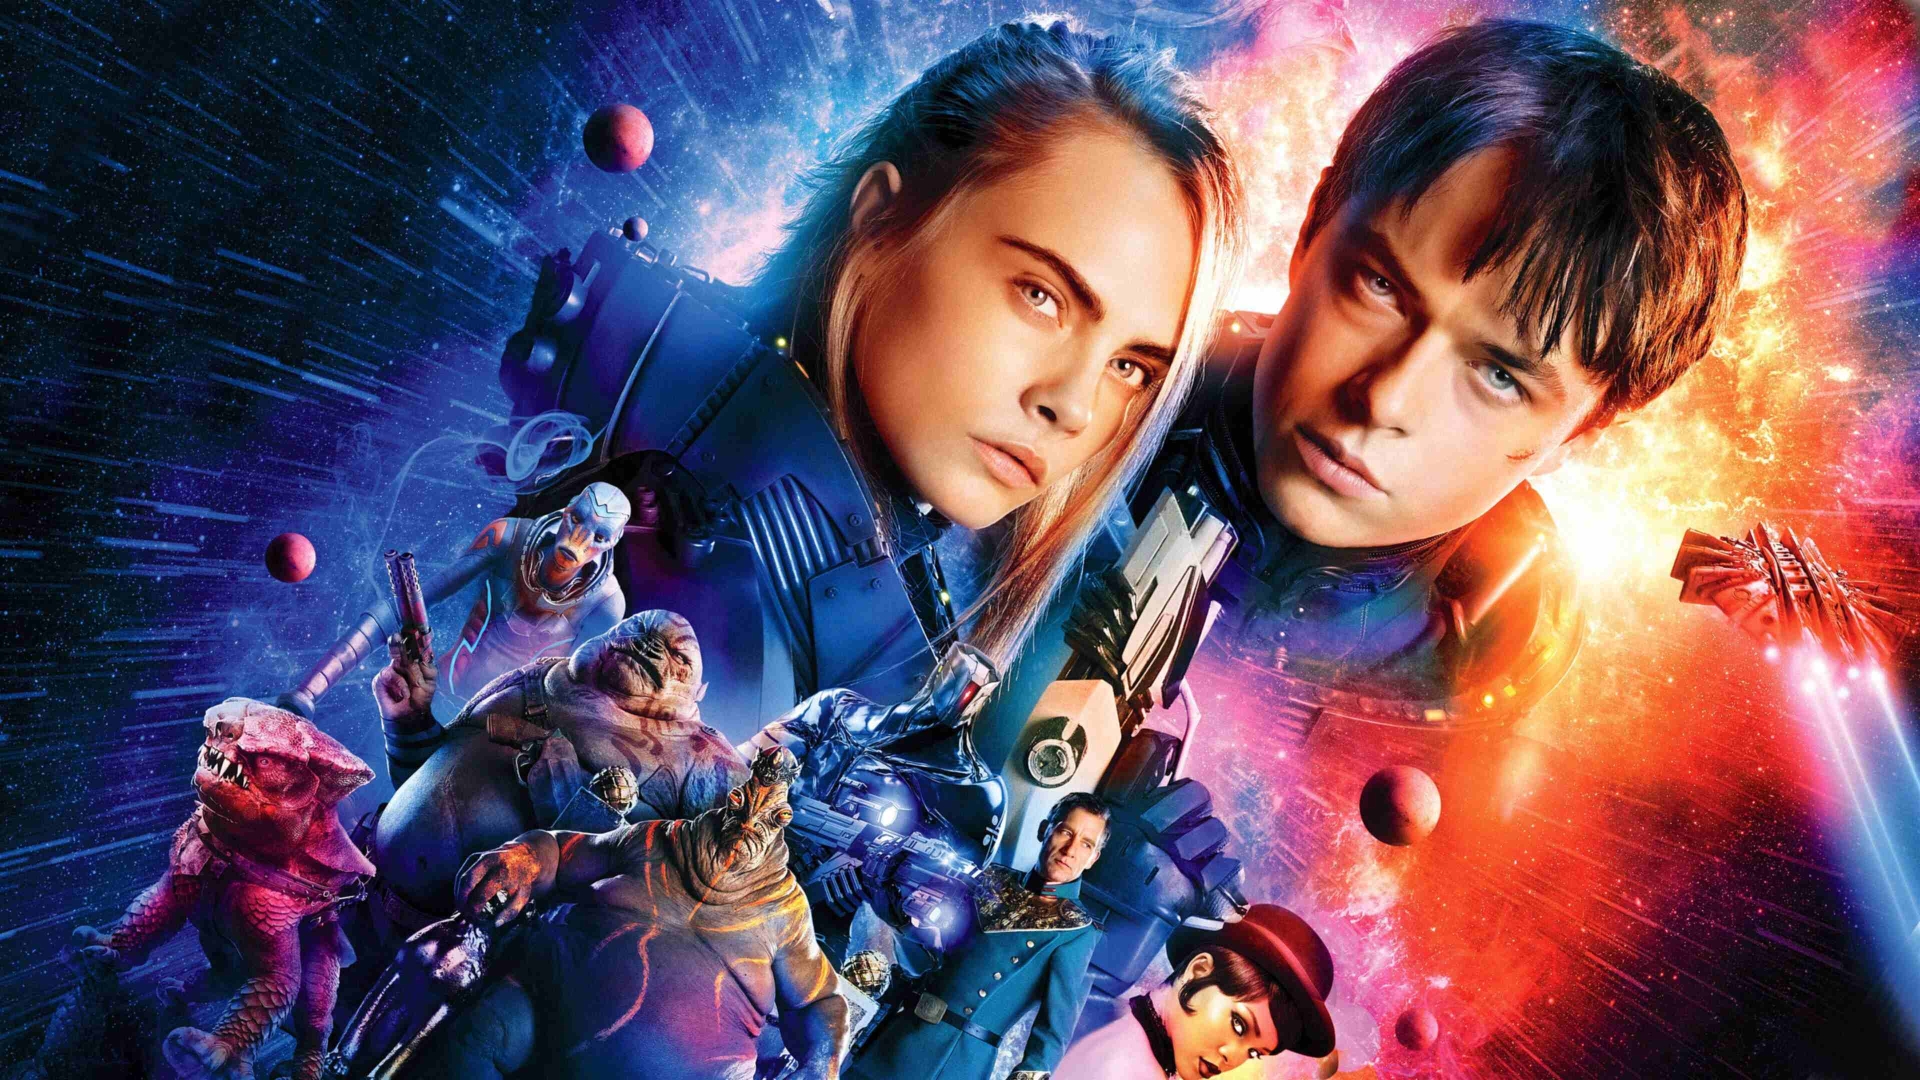 Valerian and the City of a Thousand Planets (Valerian and the City of a Thousand Planets)